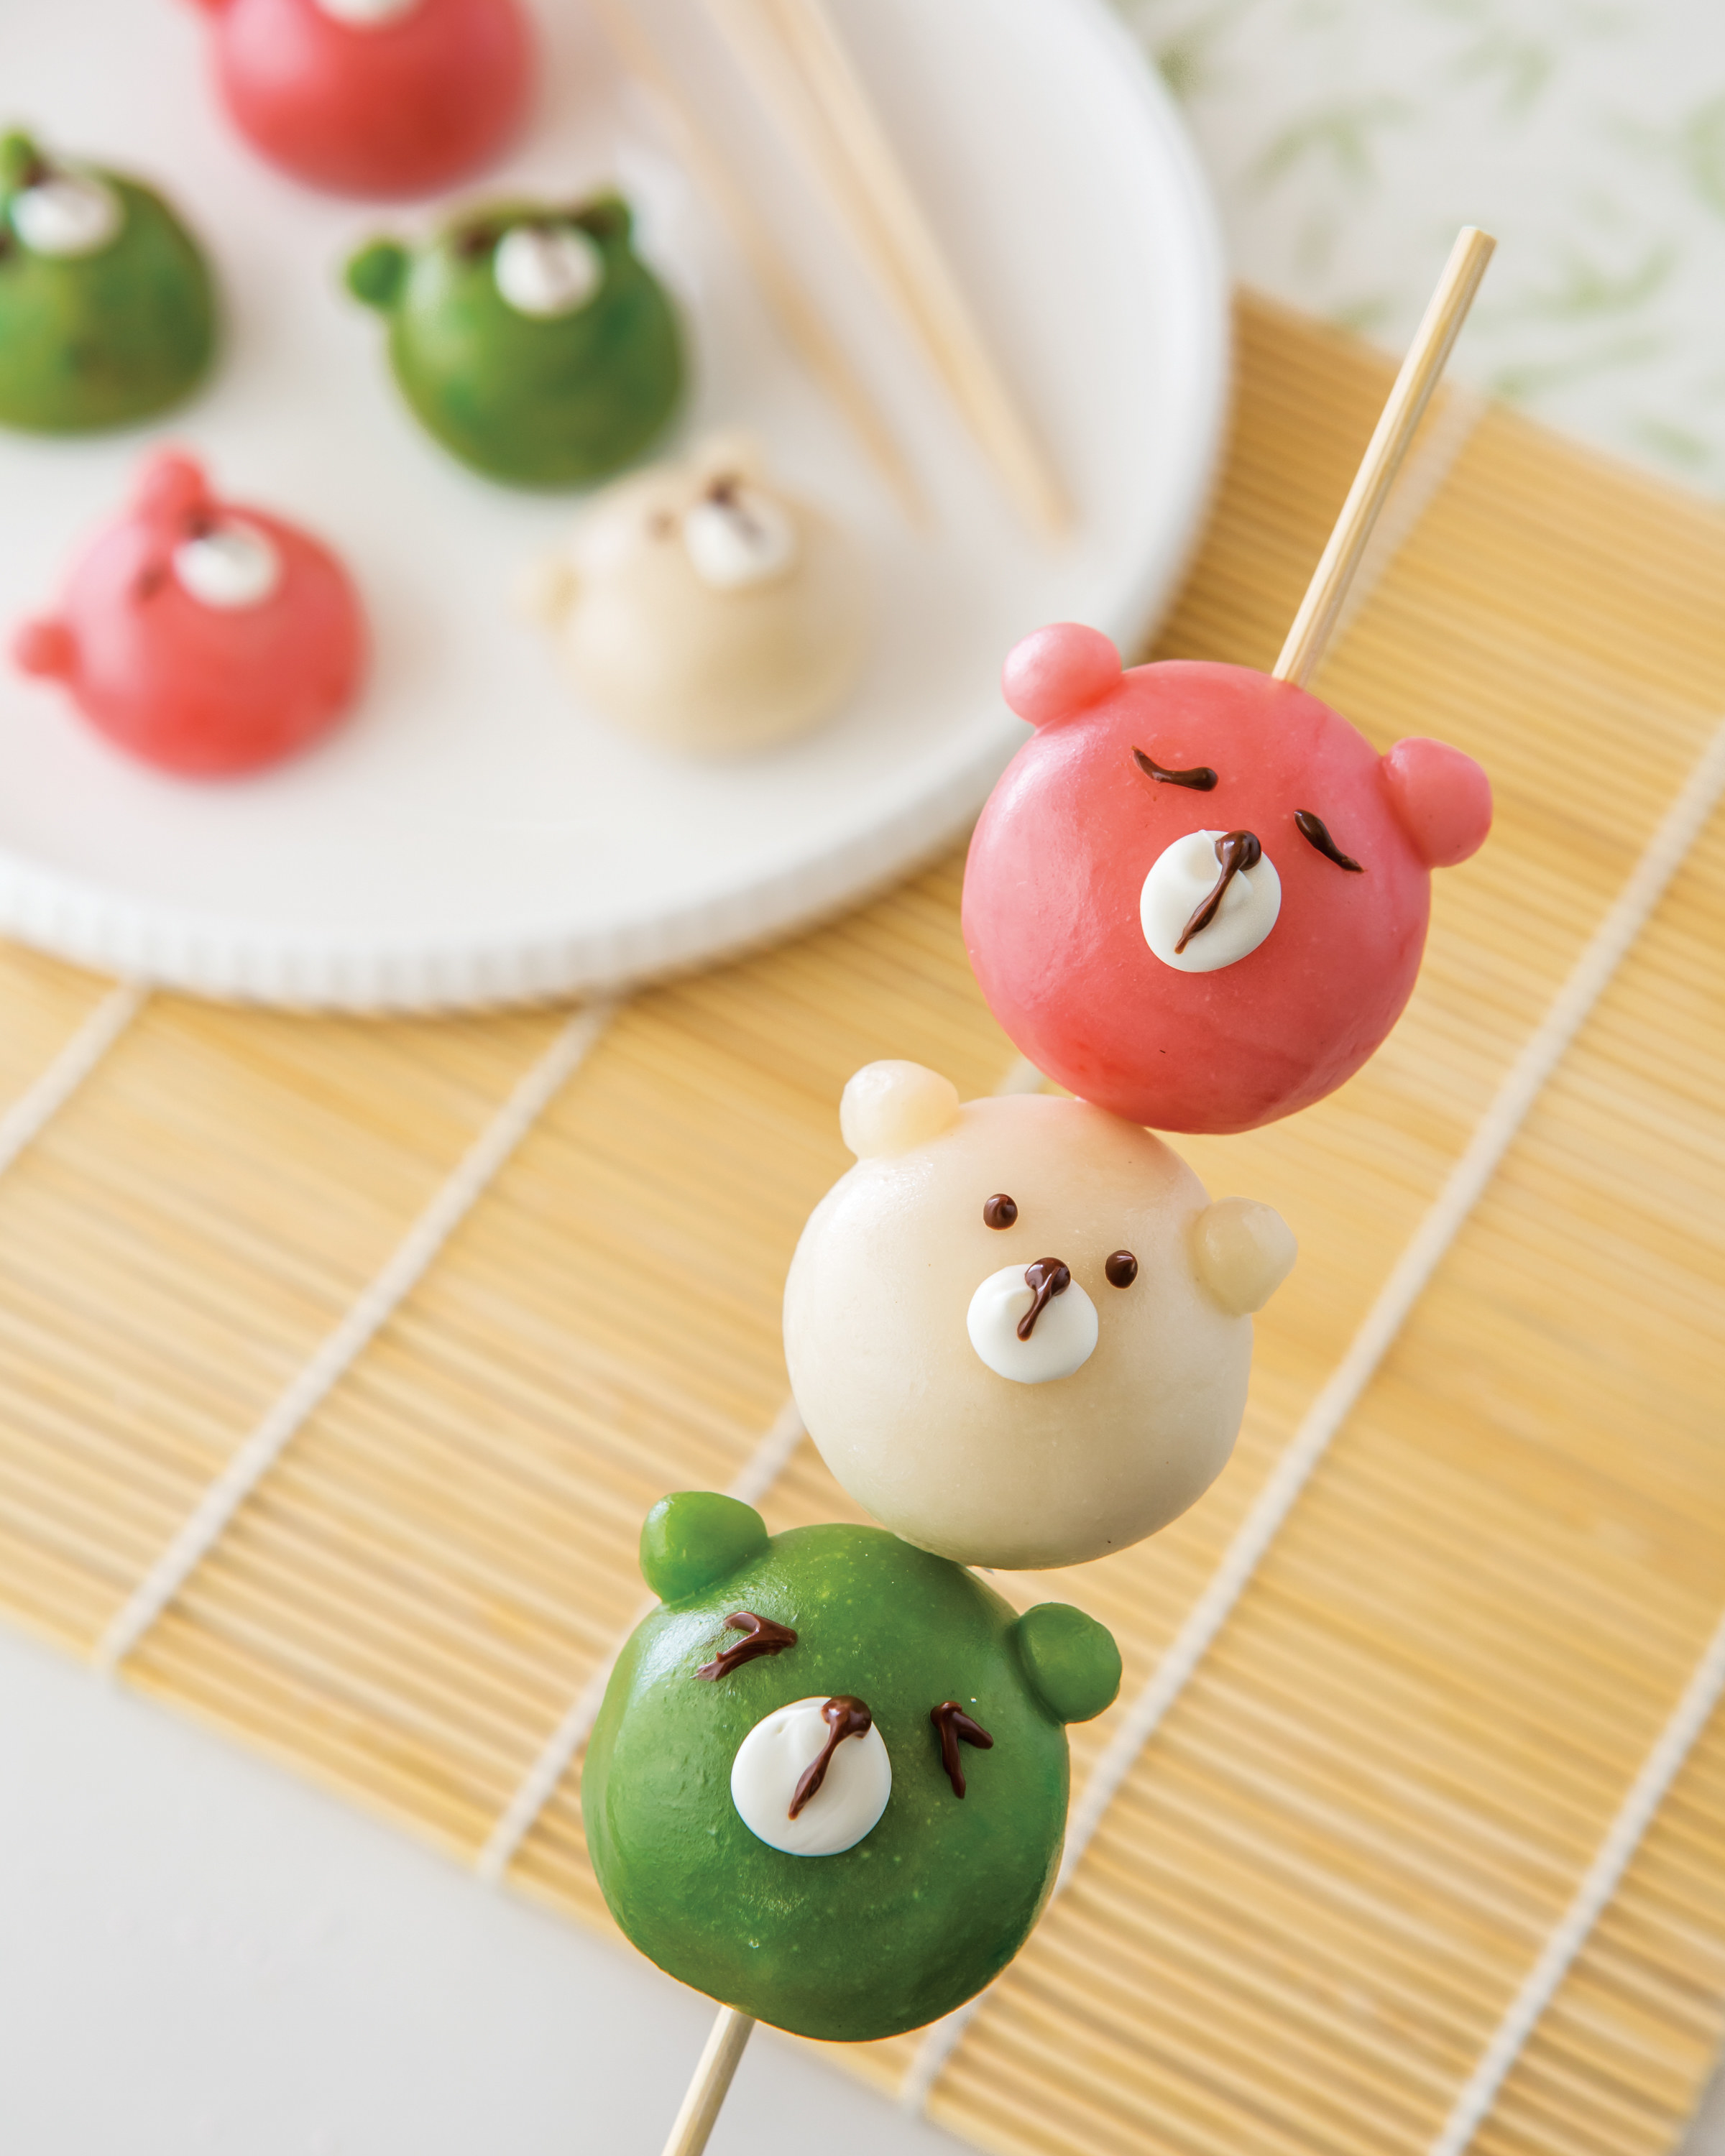 Confections on a skewer